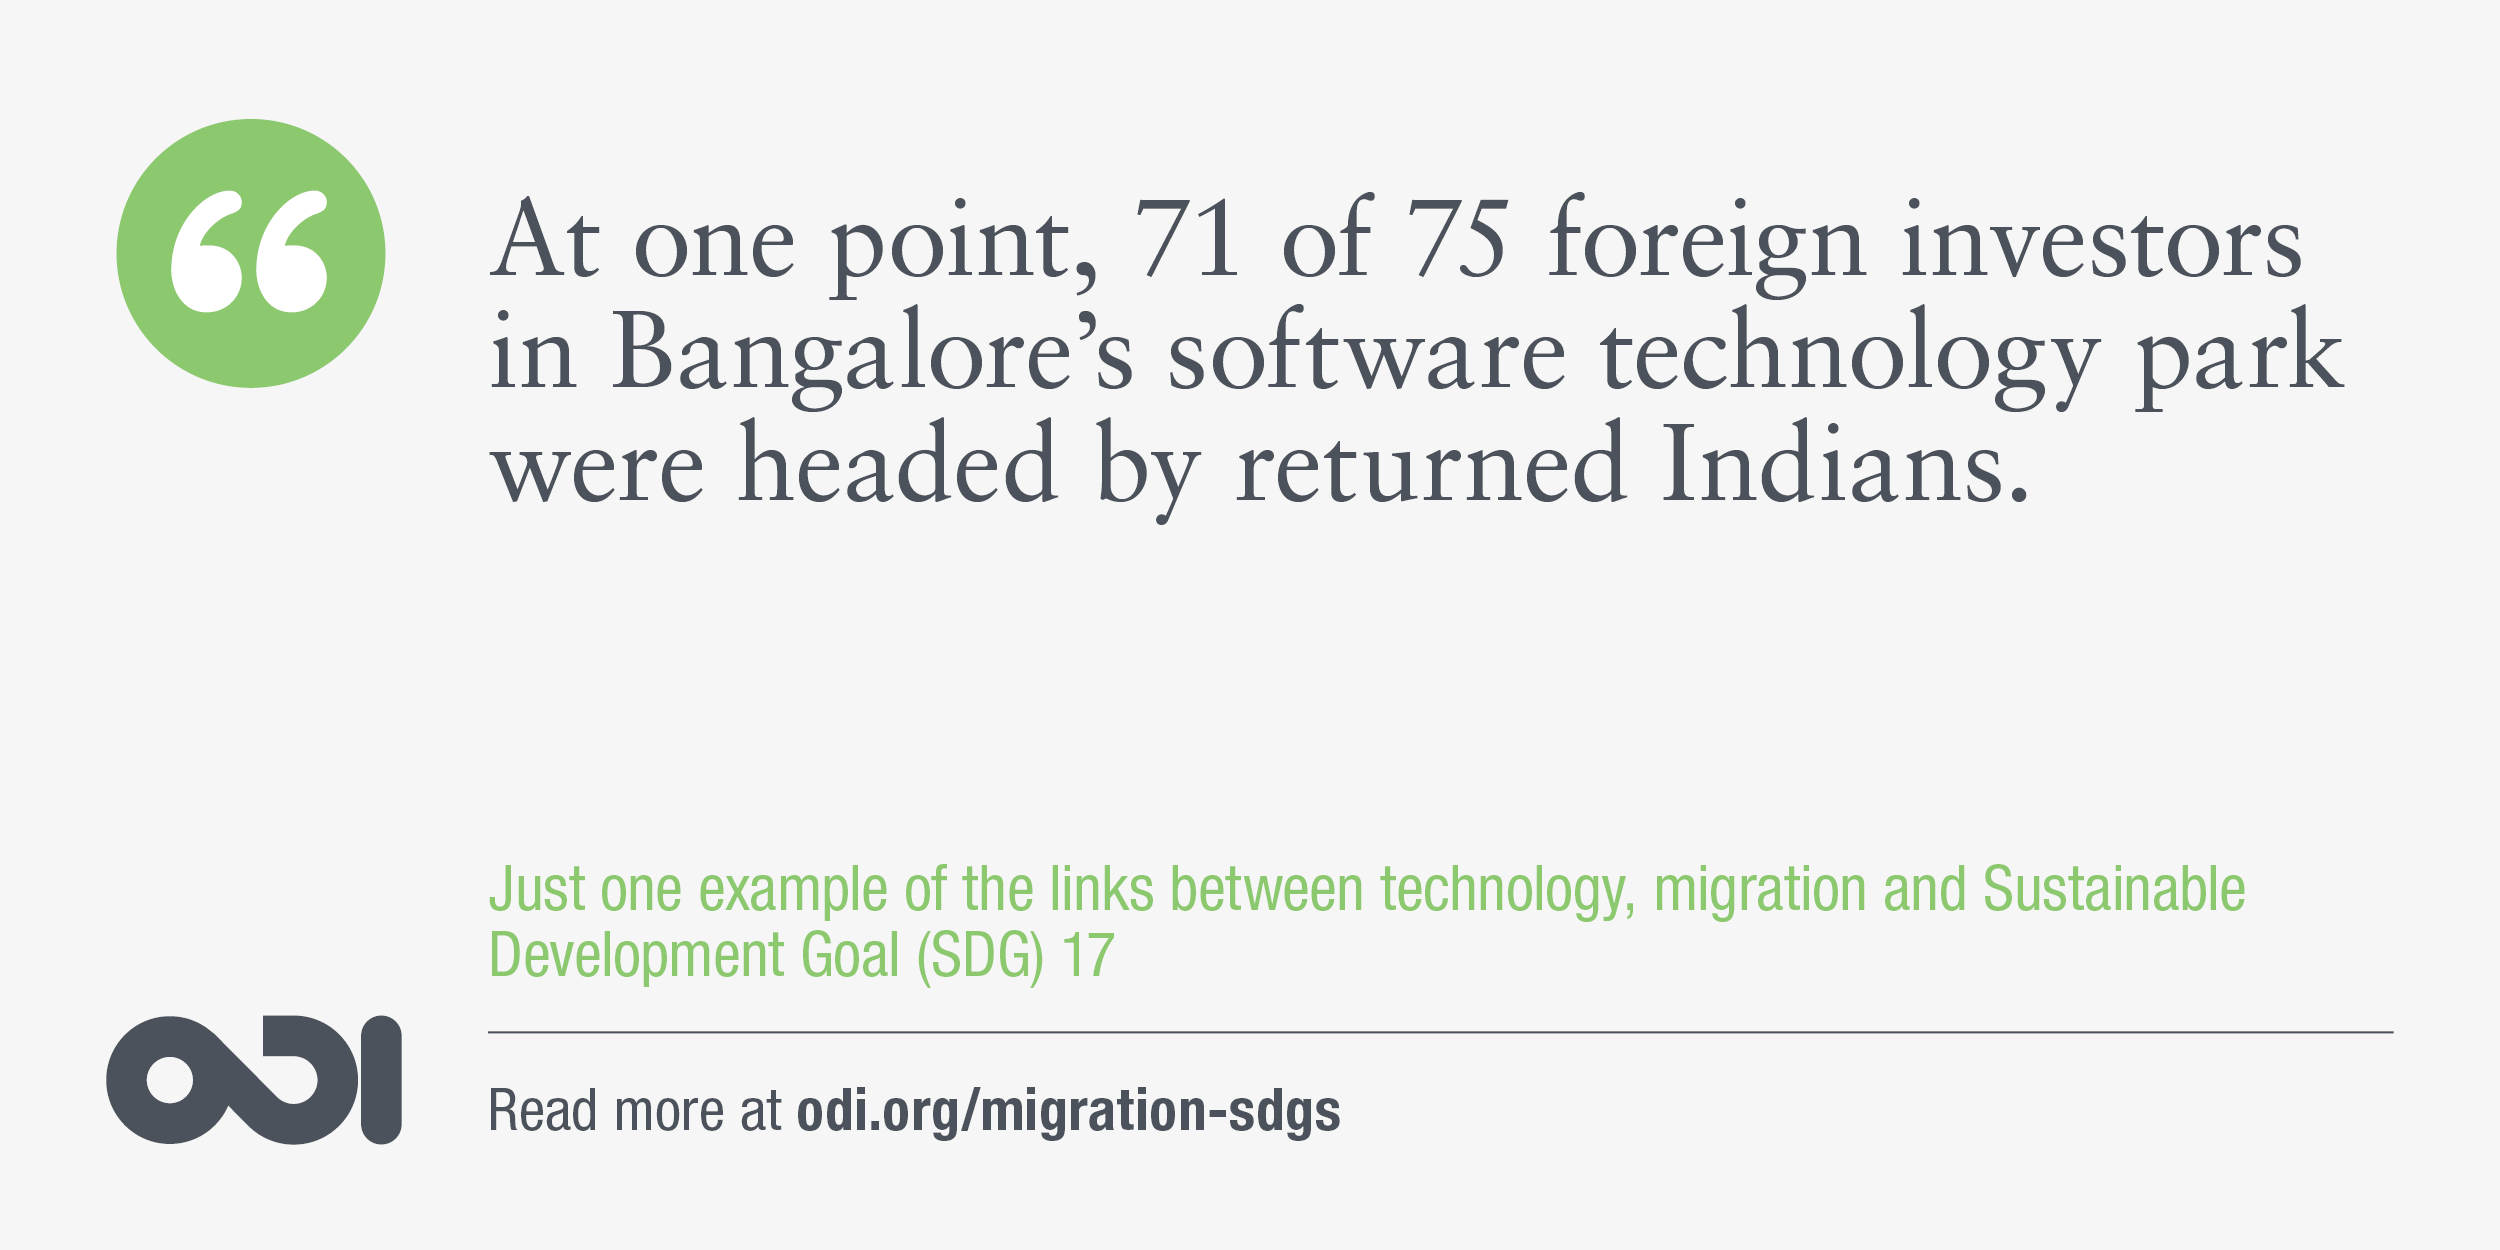 The links between technology, migration and SDG 17.